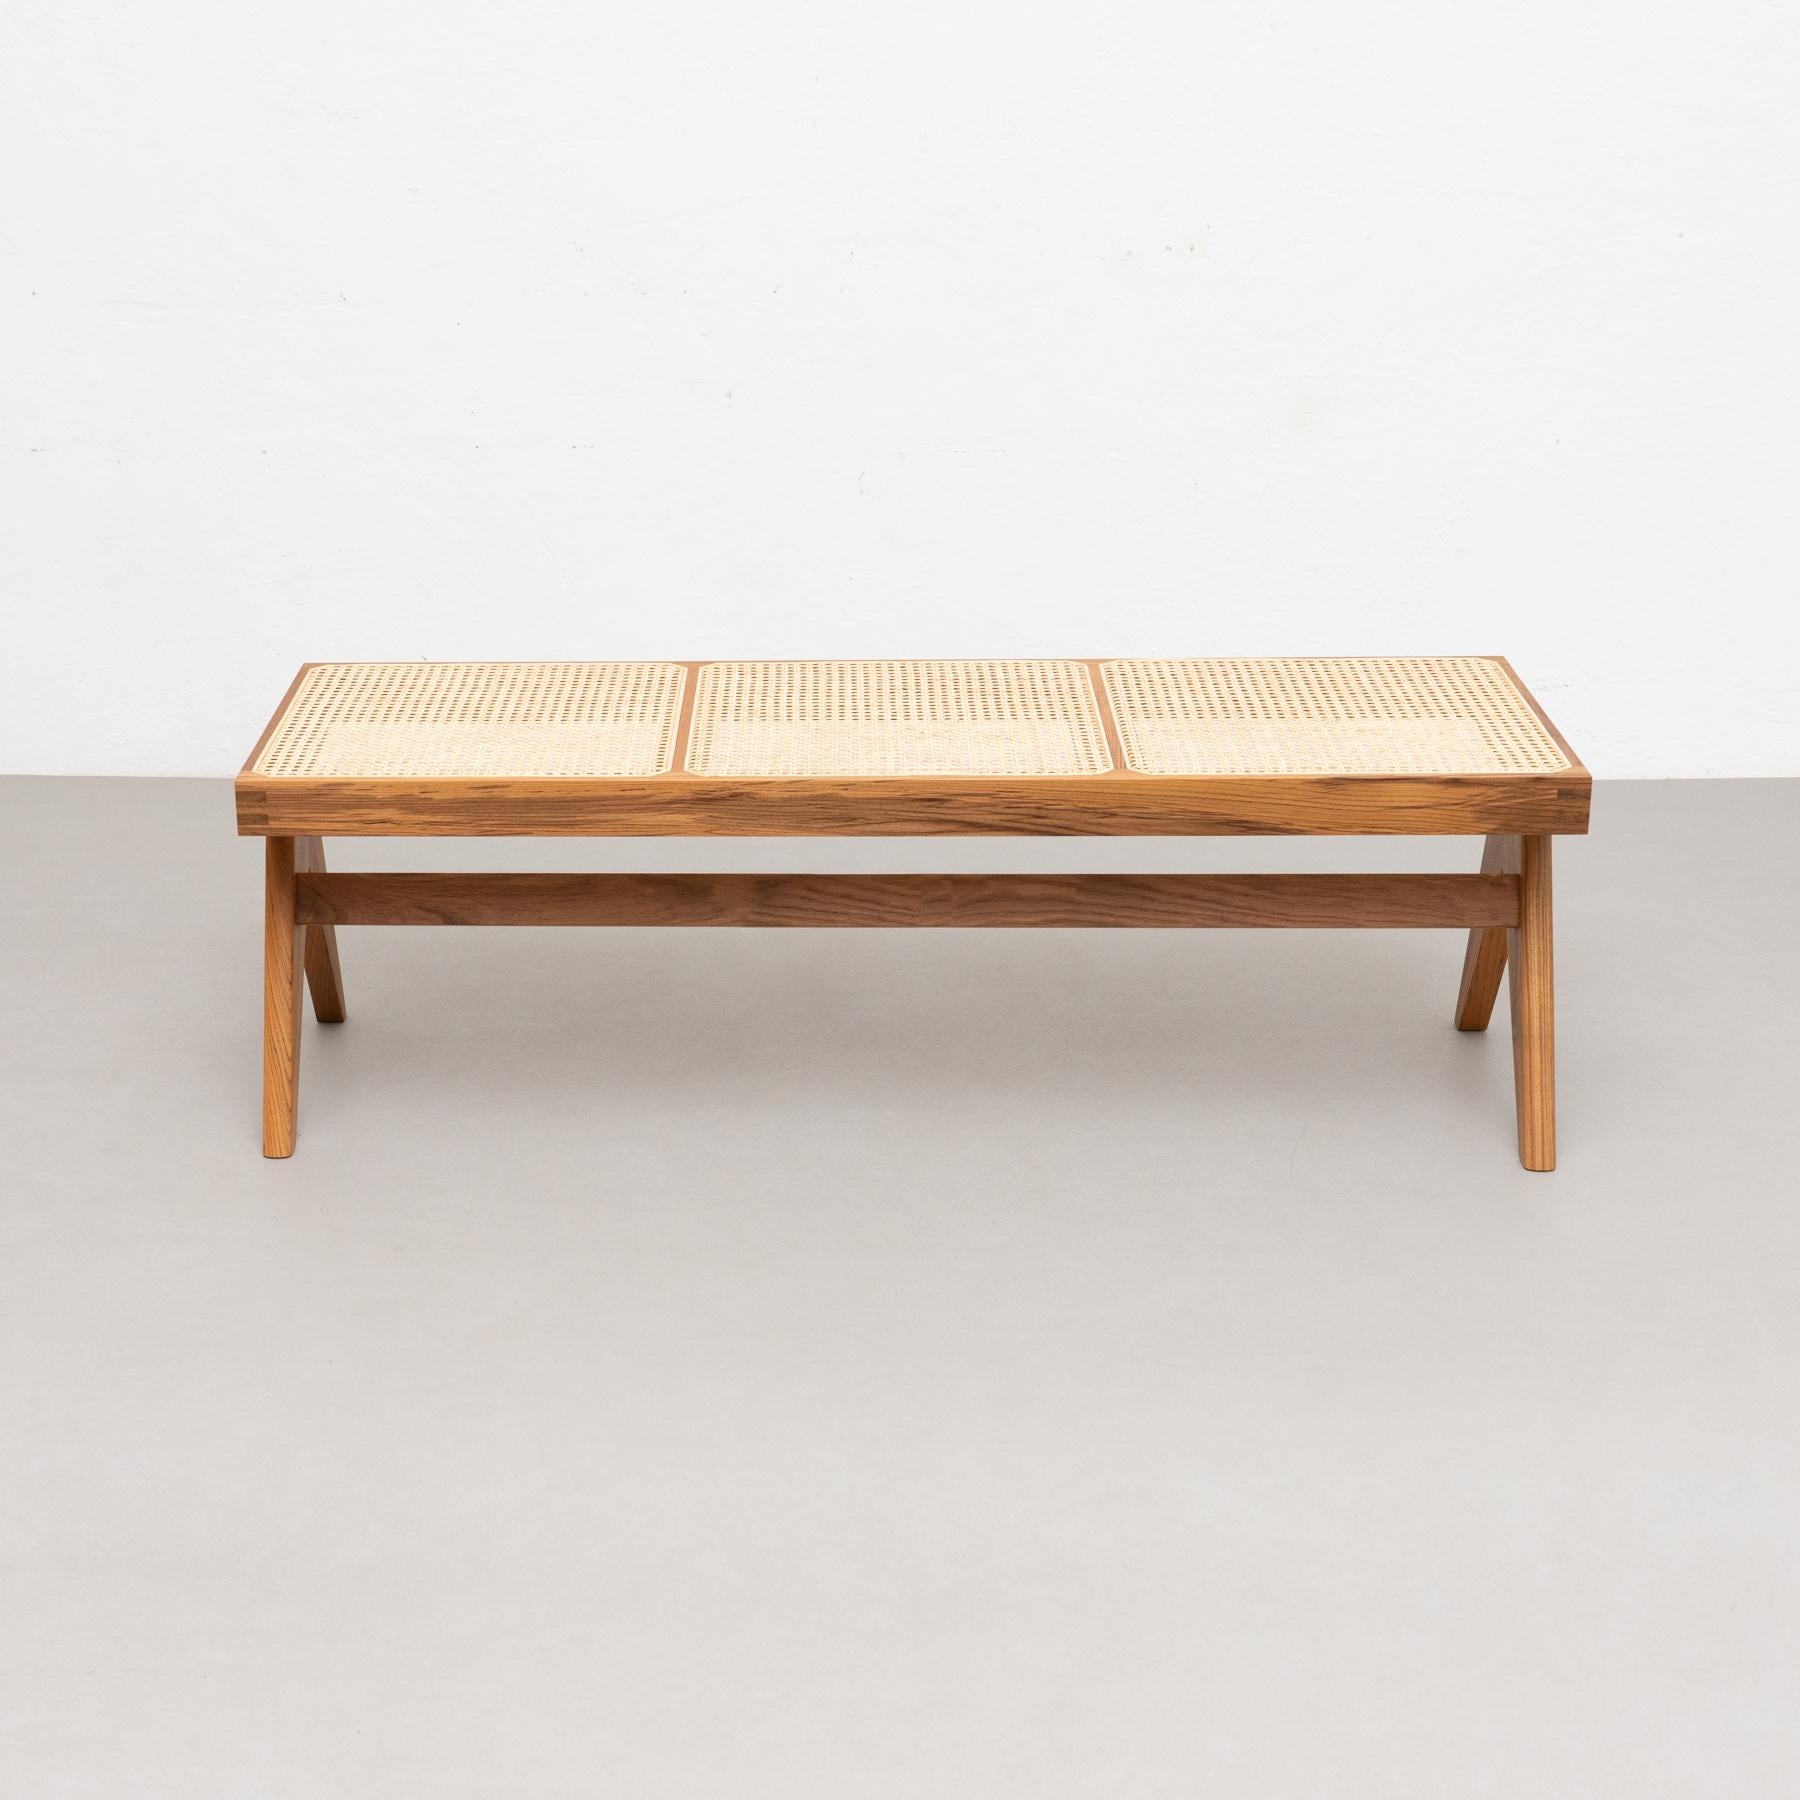 Italian Pierre Jeanneret 057 Civil Bench, Wood and Woven Viennese Cane For Sale